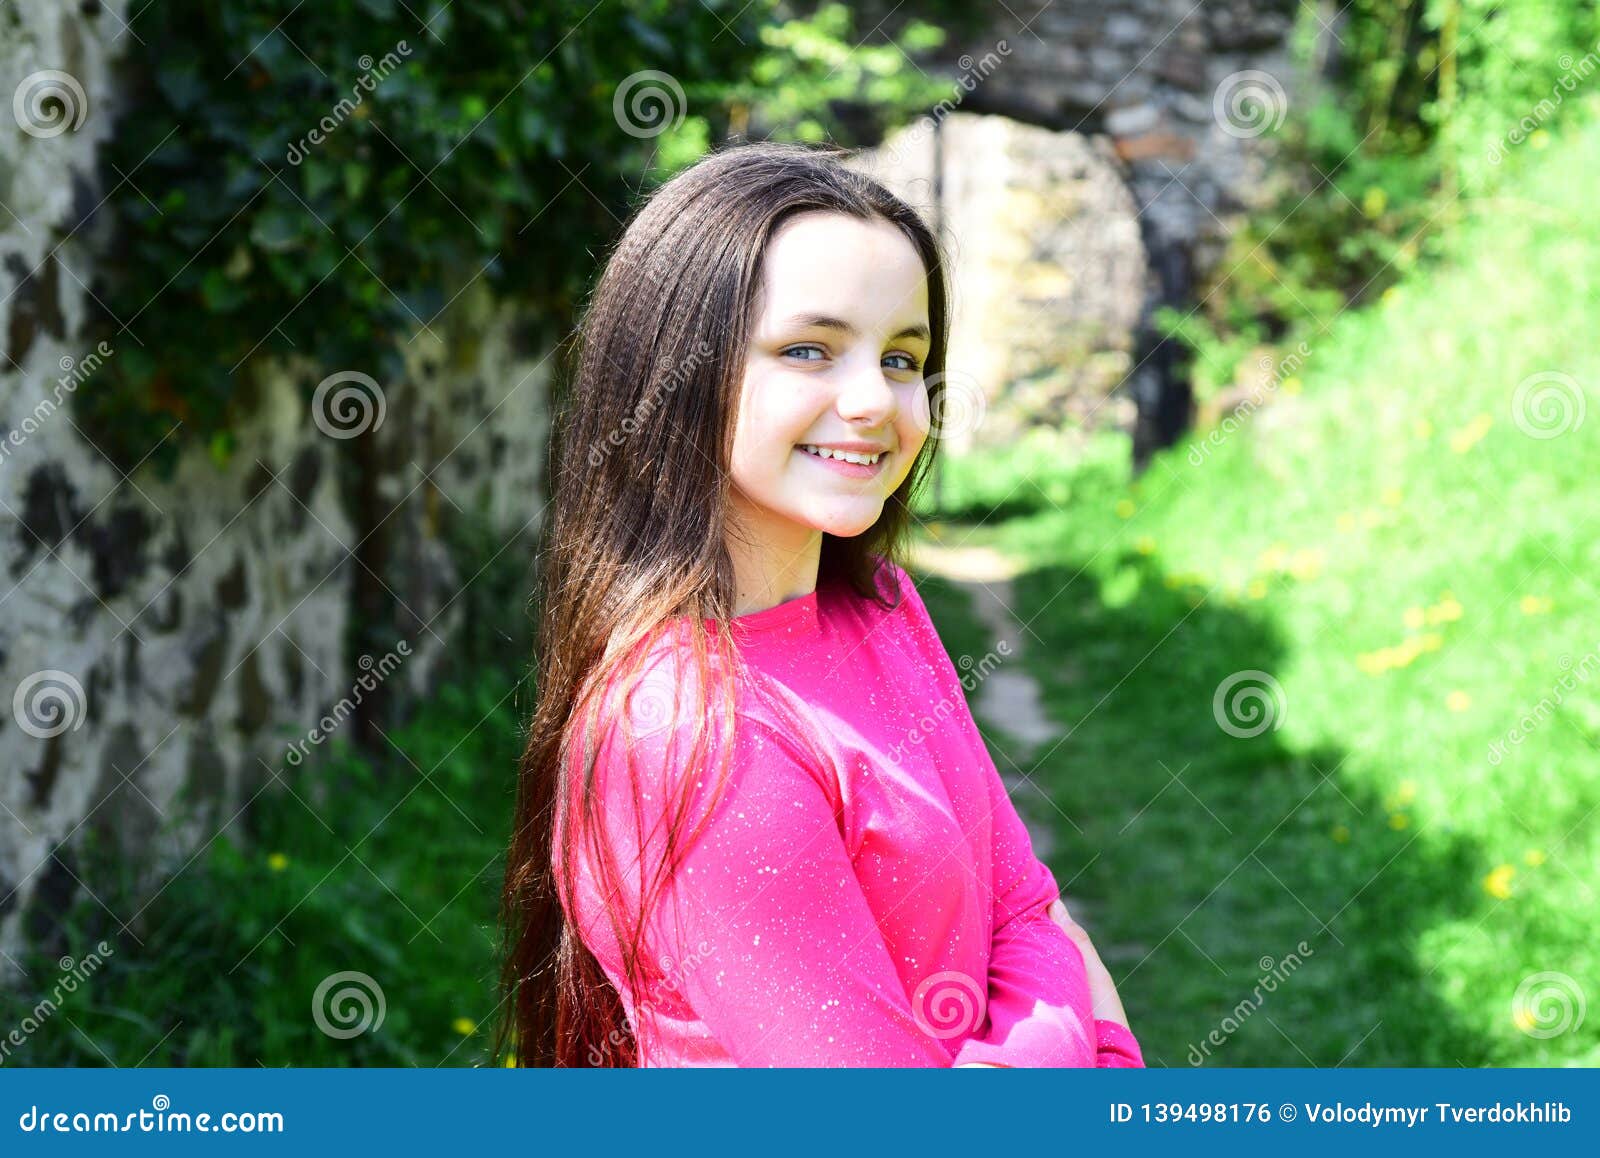 Best Look of Long Hair. Pretty Girl with Natural Straight Hairstyle on  Spring Day Stock Photo - Image of routine, small: 139498176